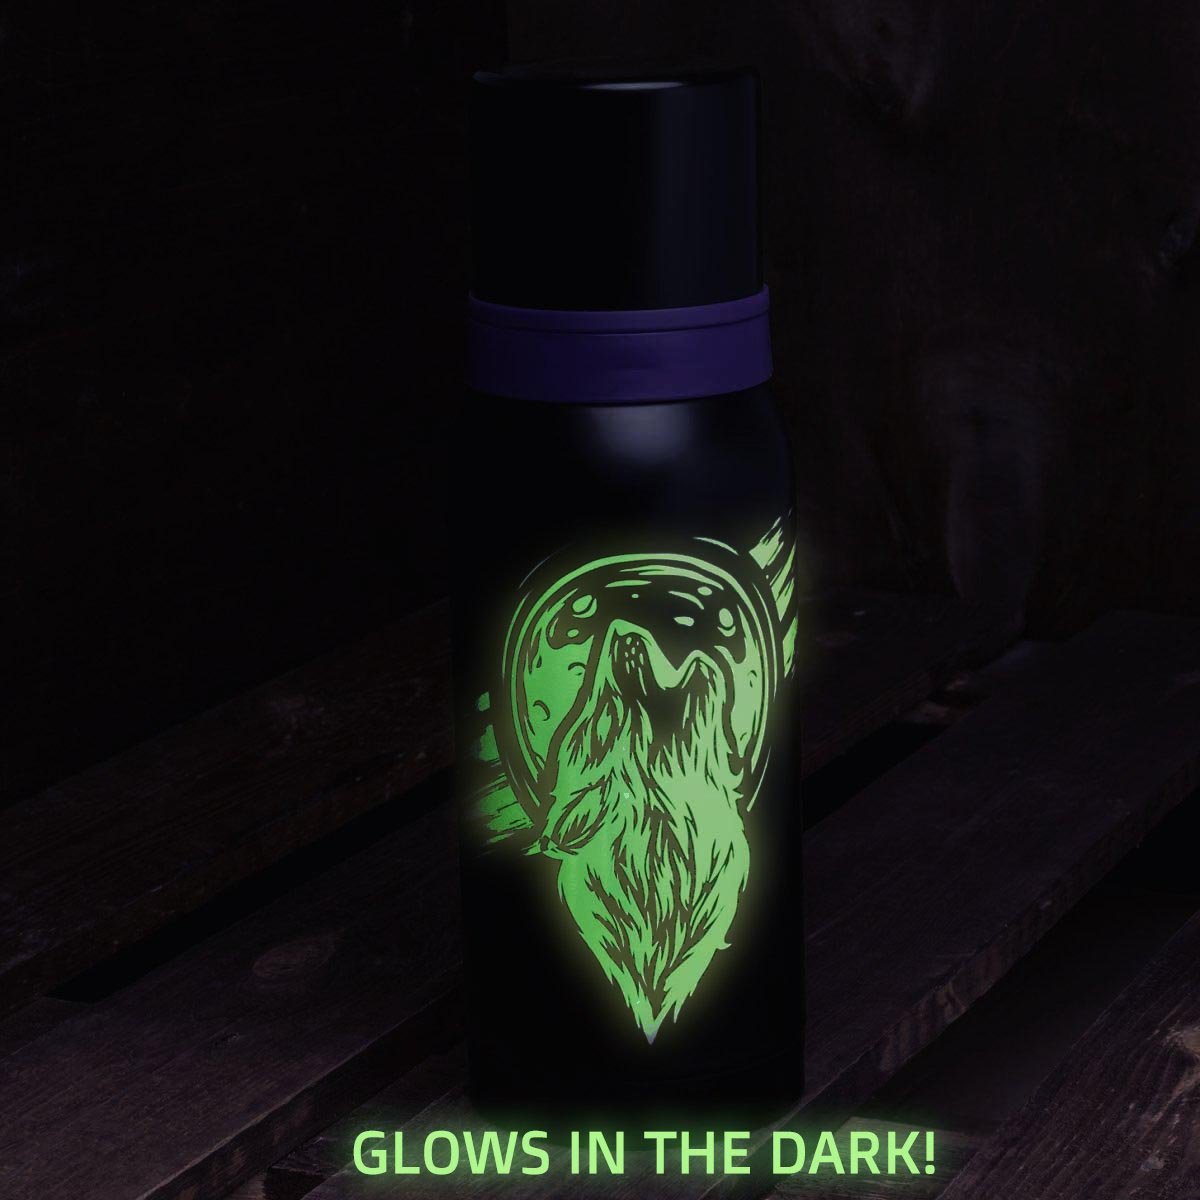 The wolf print on a Compact Stainless Steel Water Flask glows in the dark